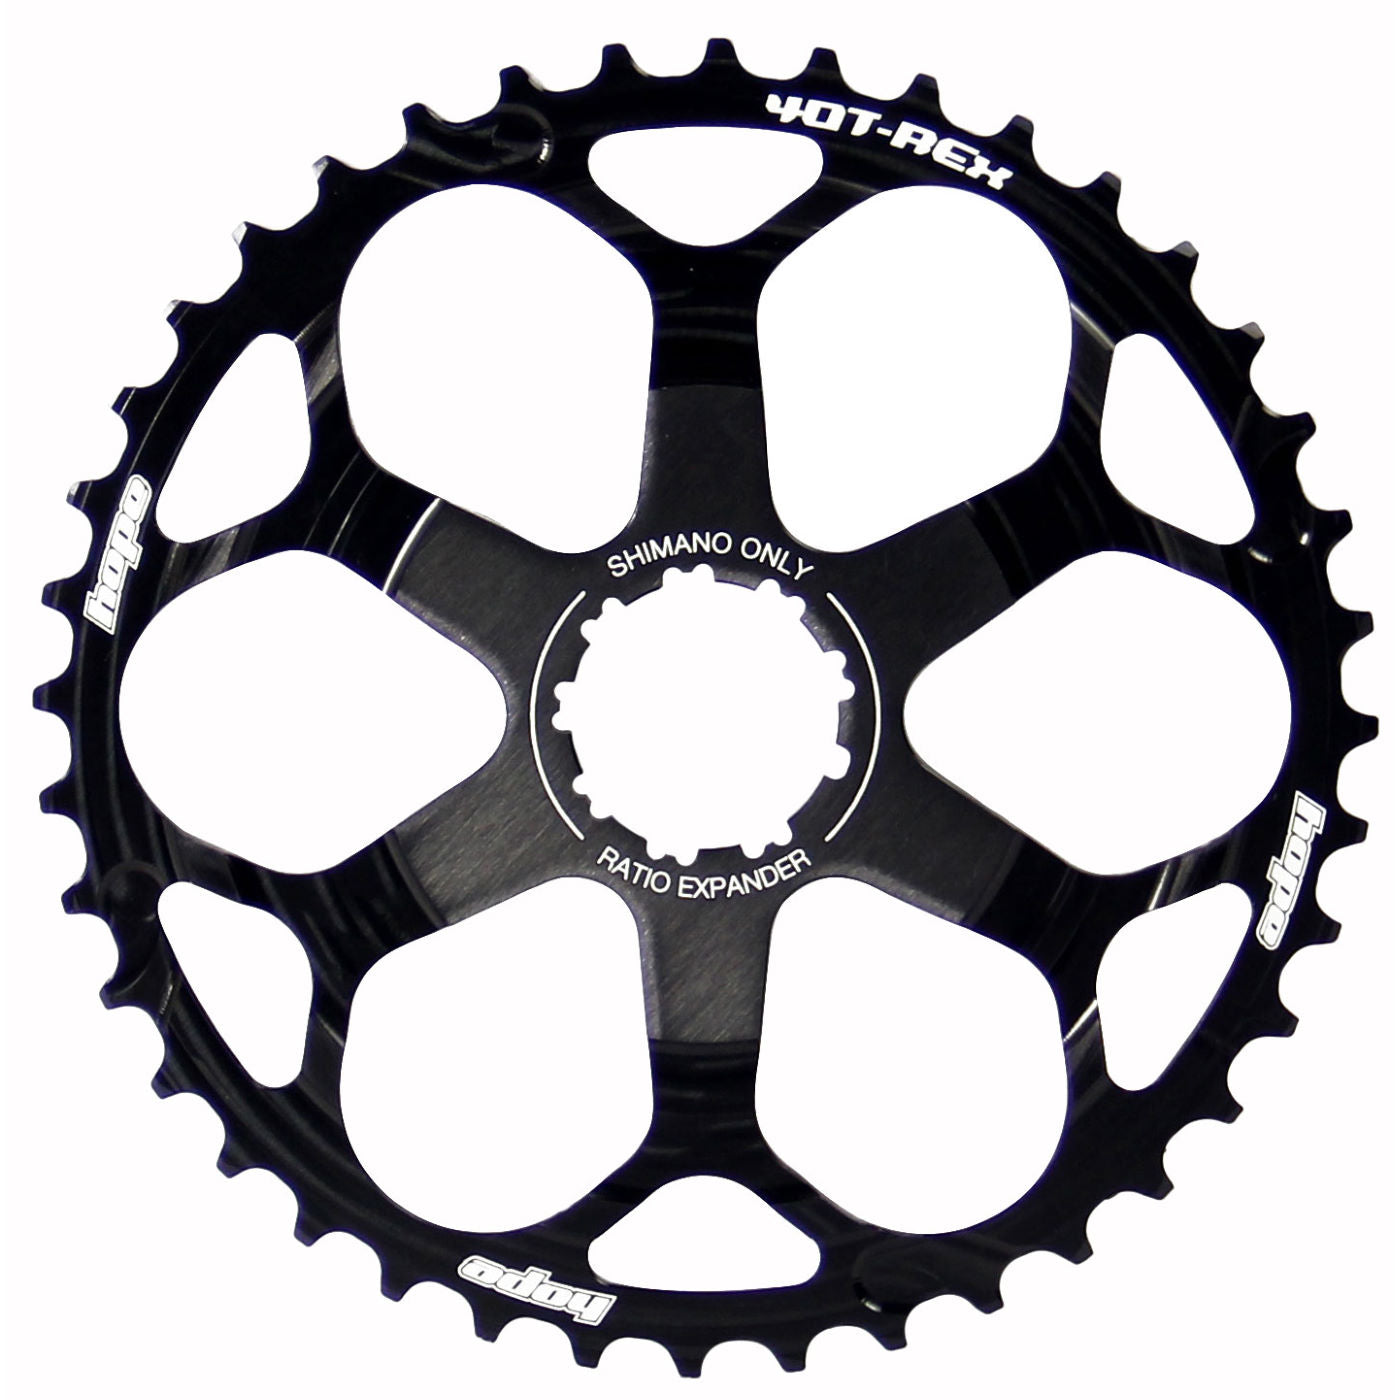 Hope 40t-REx (40t ratio expander) allows you to upgrade your existing 11-36 10spd cassette to give an 11-40 range